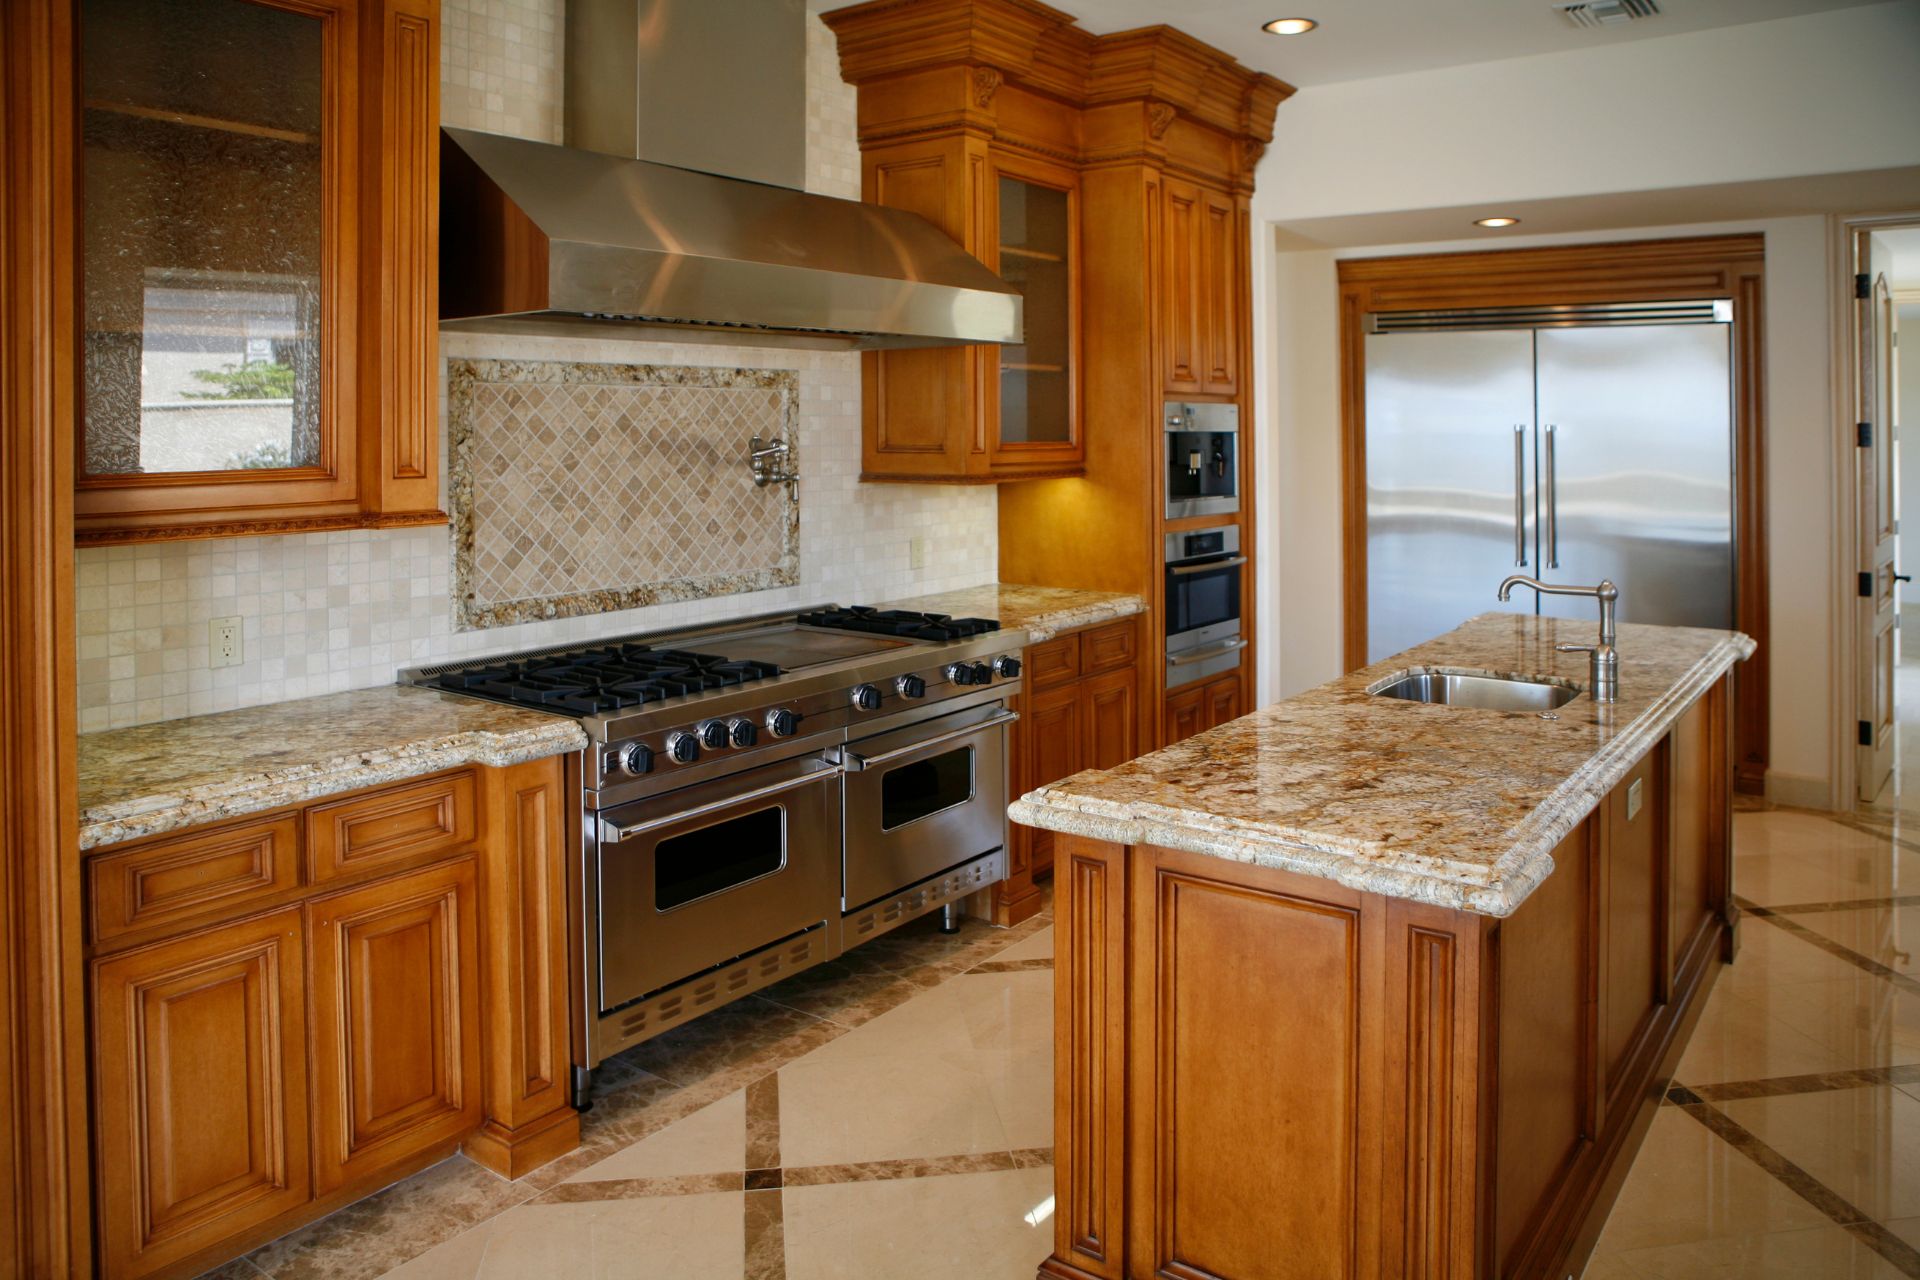 How Much Does A Kitchen Remodel Add To Home Value 1 